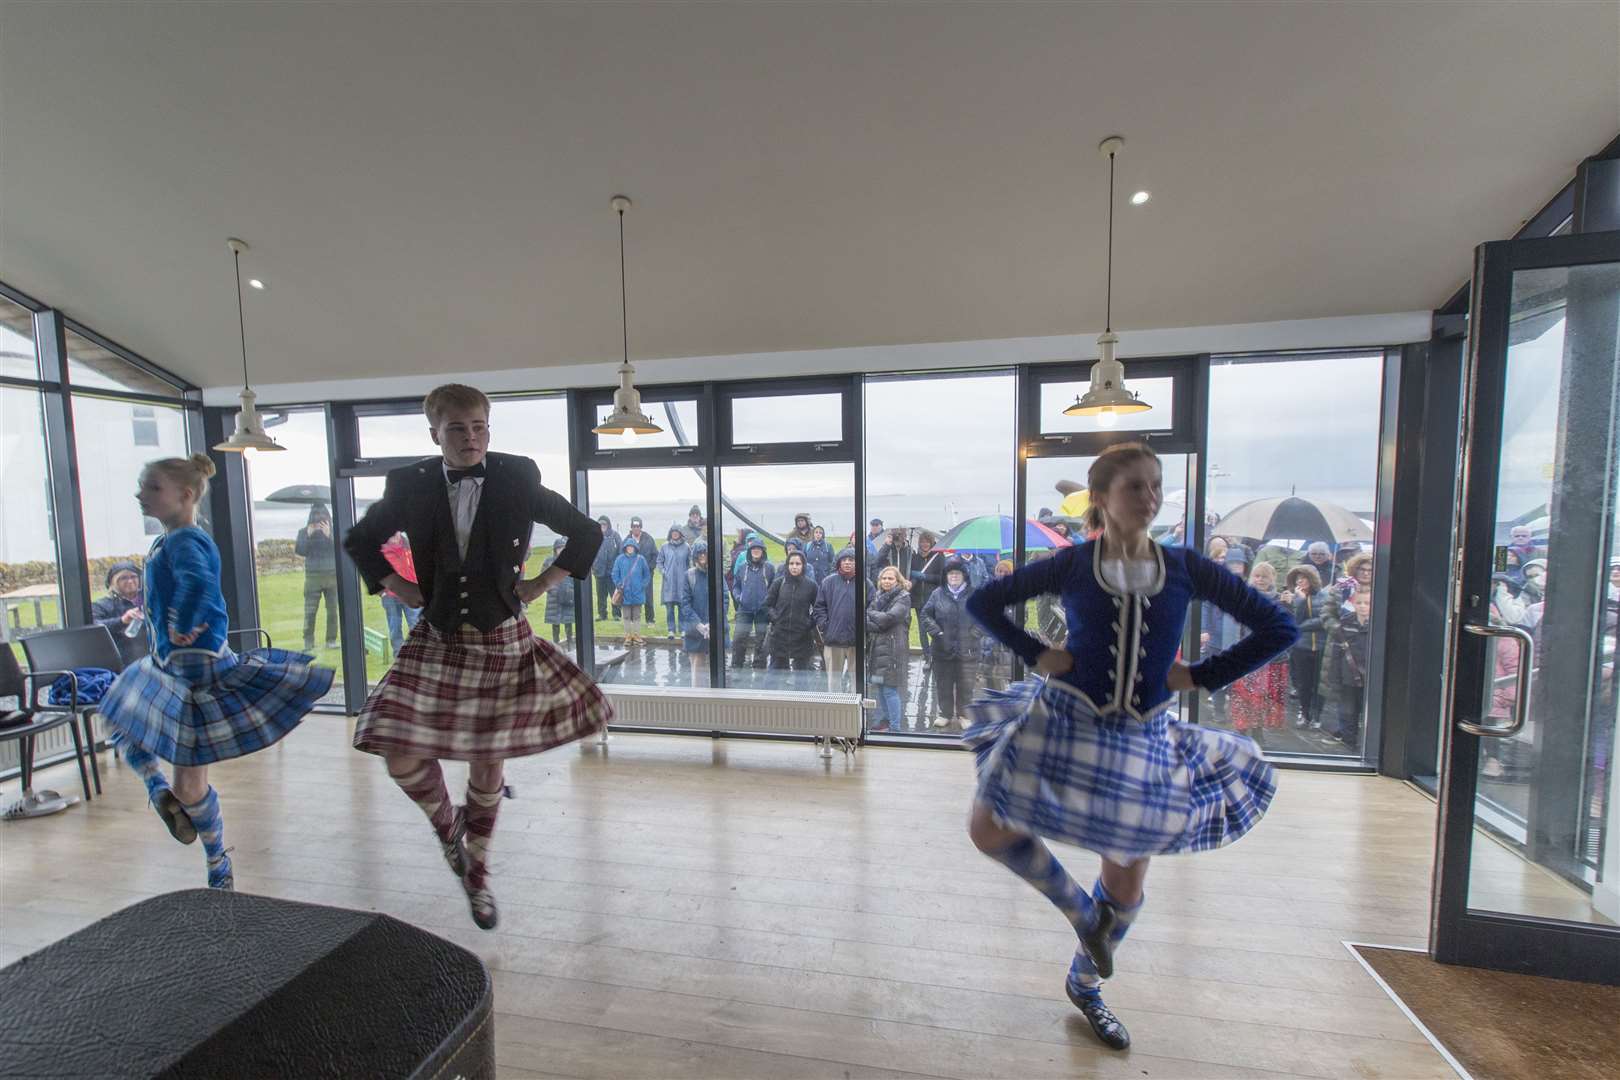 Members of the Violet Leitch School of Dancing give a display in Café Groats as a rather damp audience looks on from outside. Picture: Robert MacDonald / Northern Studios